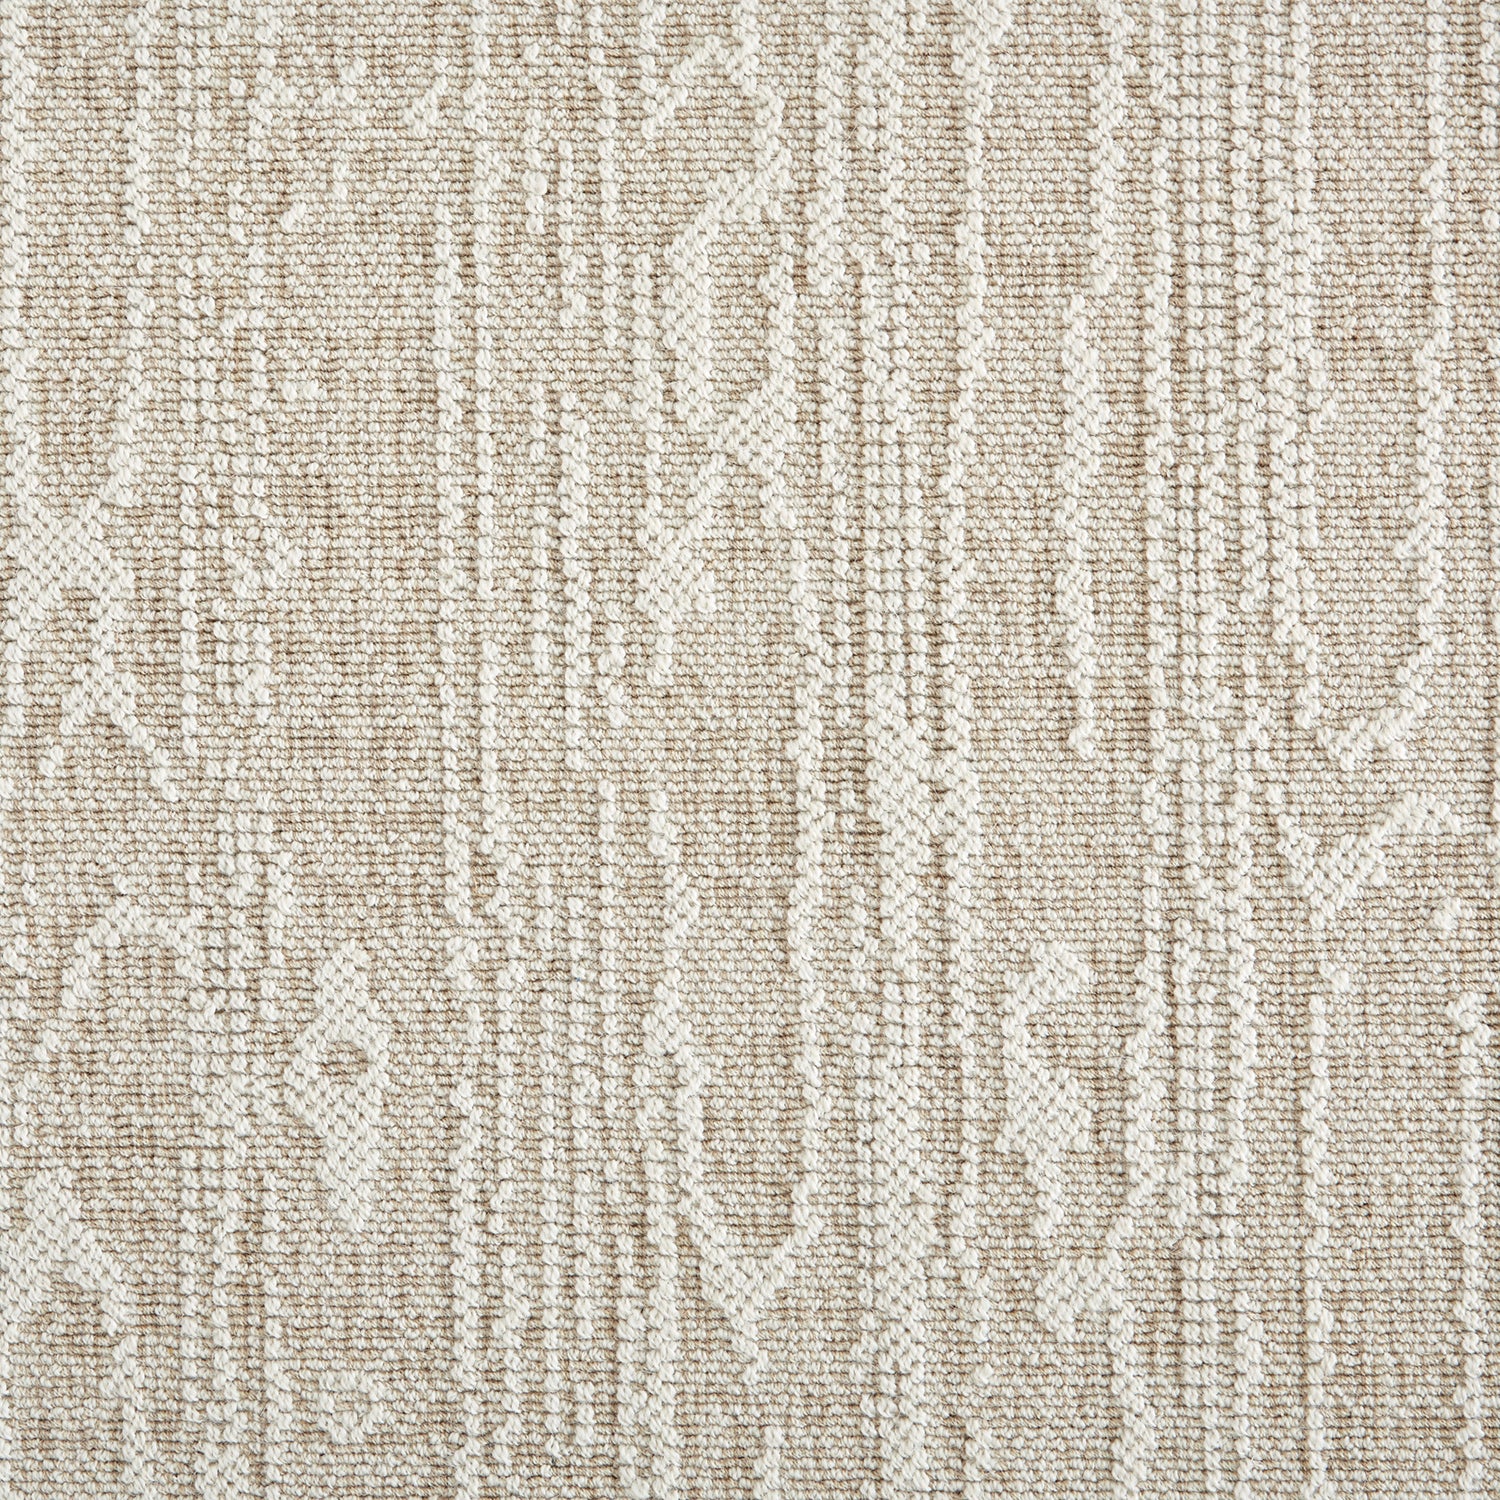 Wool-blend broadloom carpet swatch in a dimensional treetrunk weave pattern in cream and white.